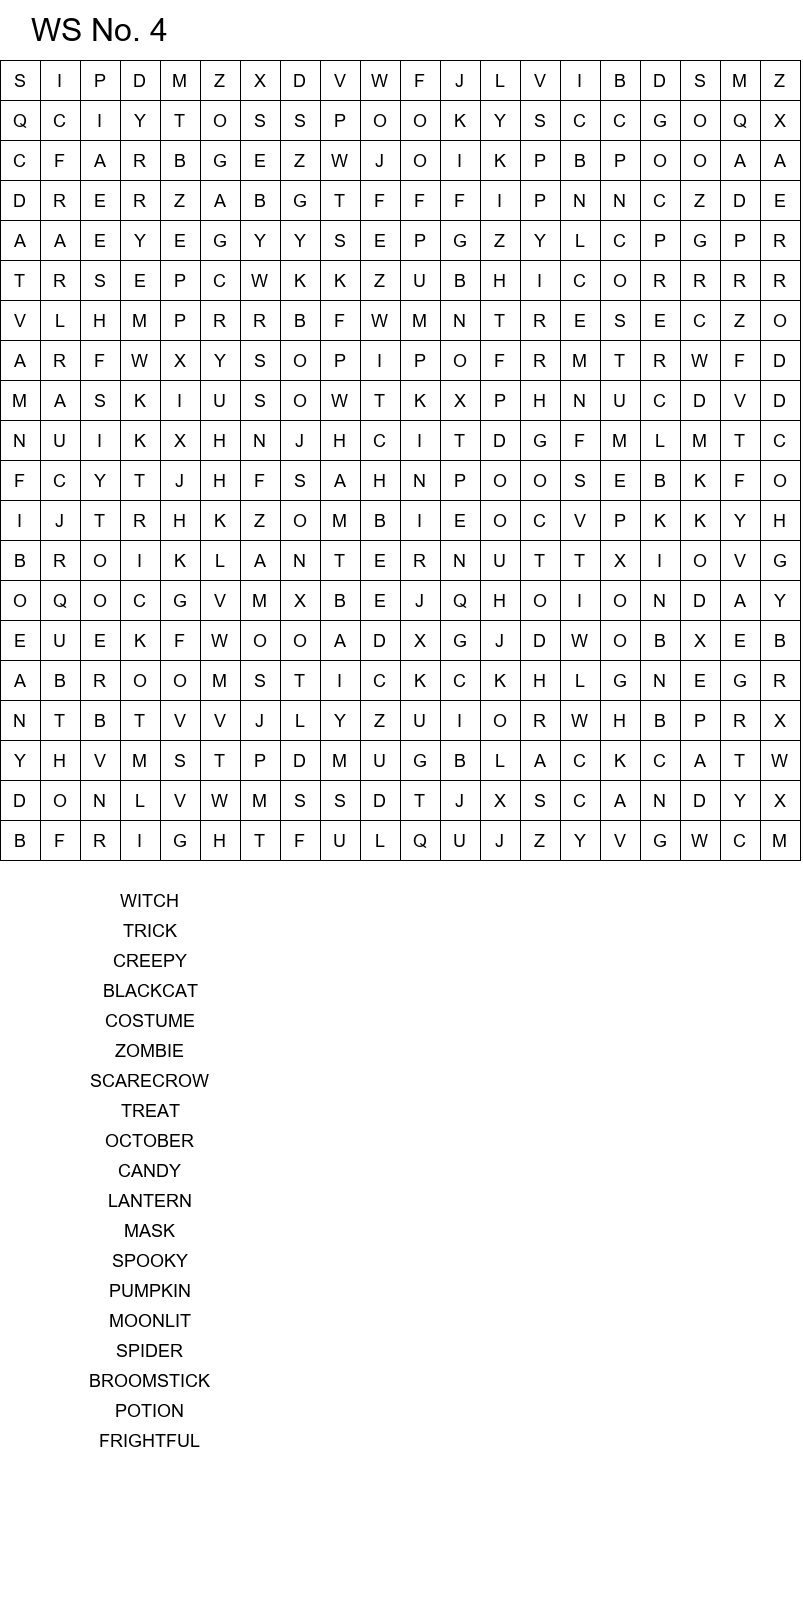 Free online Halloween word search puzzles size 20x20 No 4